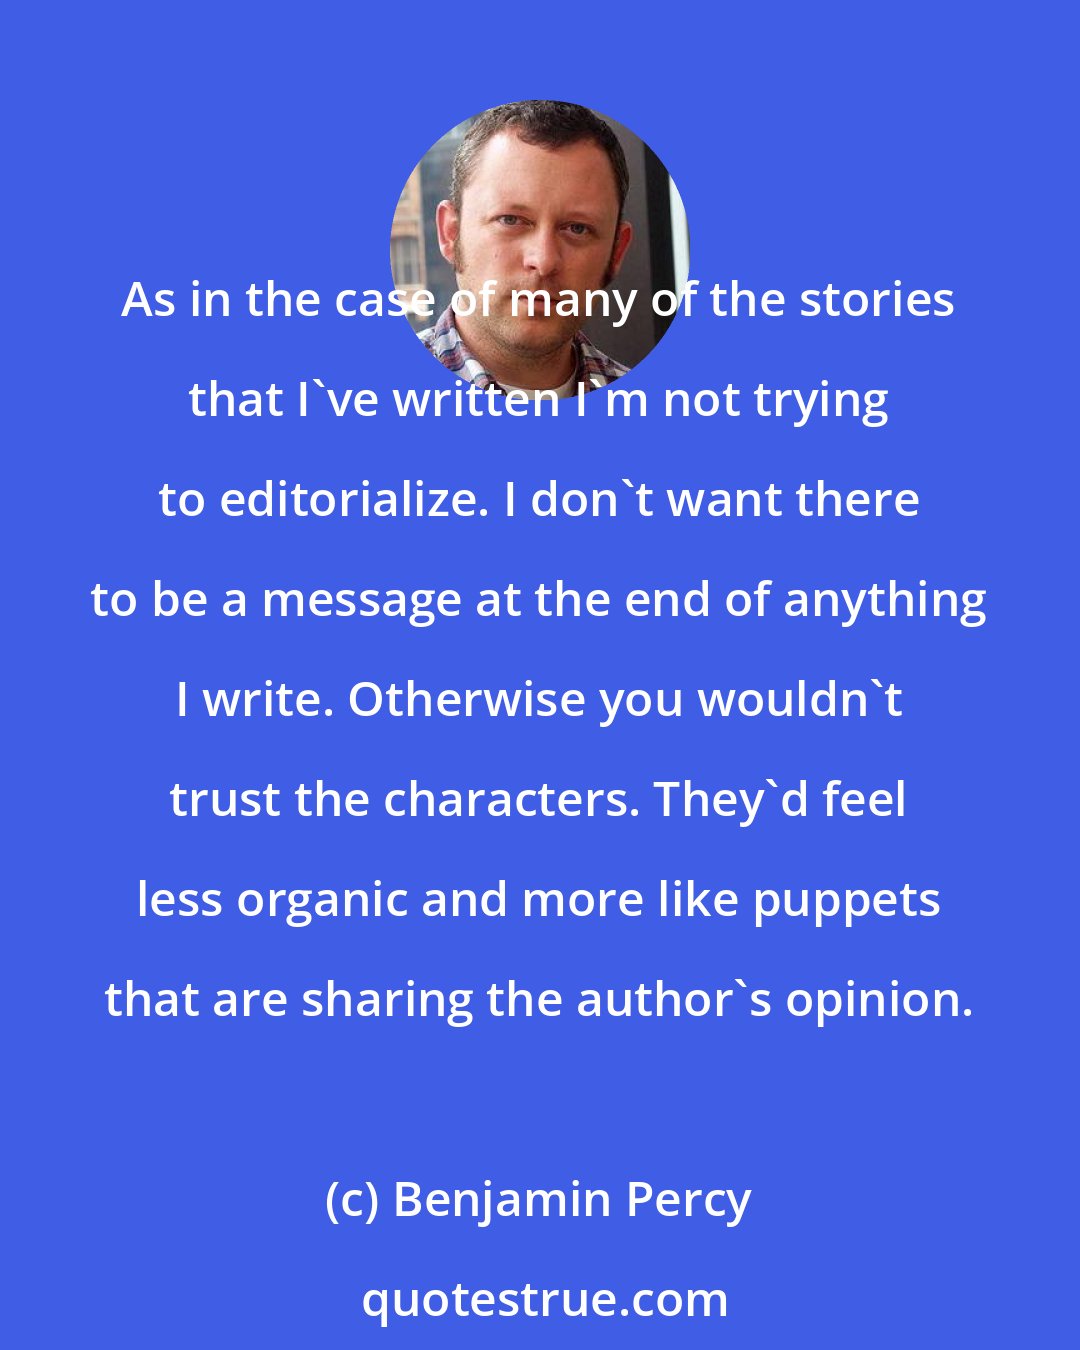 Benjamin Percy: As in the case of many of the stories that I've written I'm not trying to editorialize. I don't want there to be a message at the end of anything I write. Otherwise you wouldn't trust the characters. They'd feel less organic and more like puppets that are sharing the author's opinion.